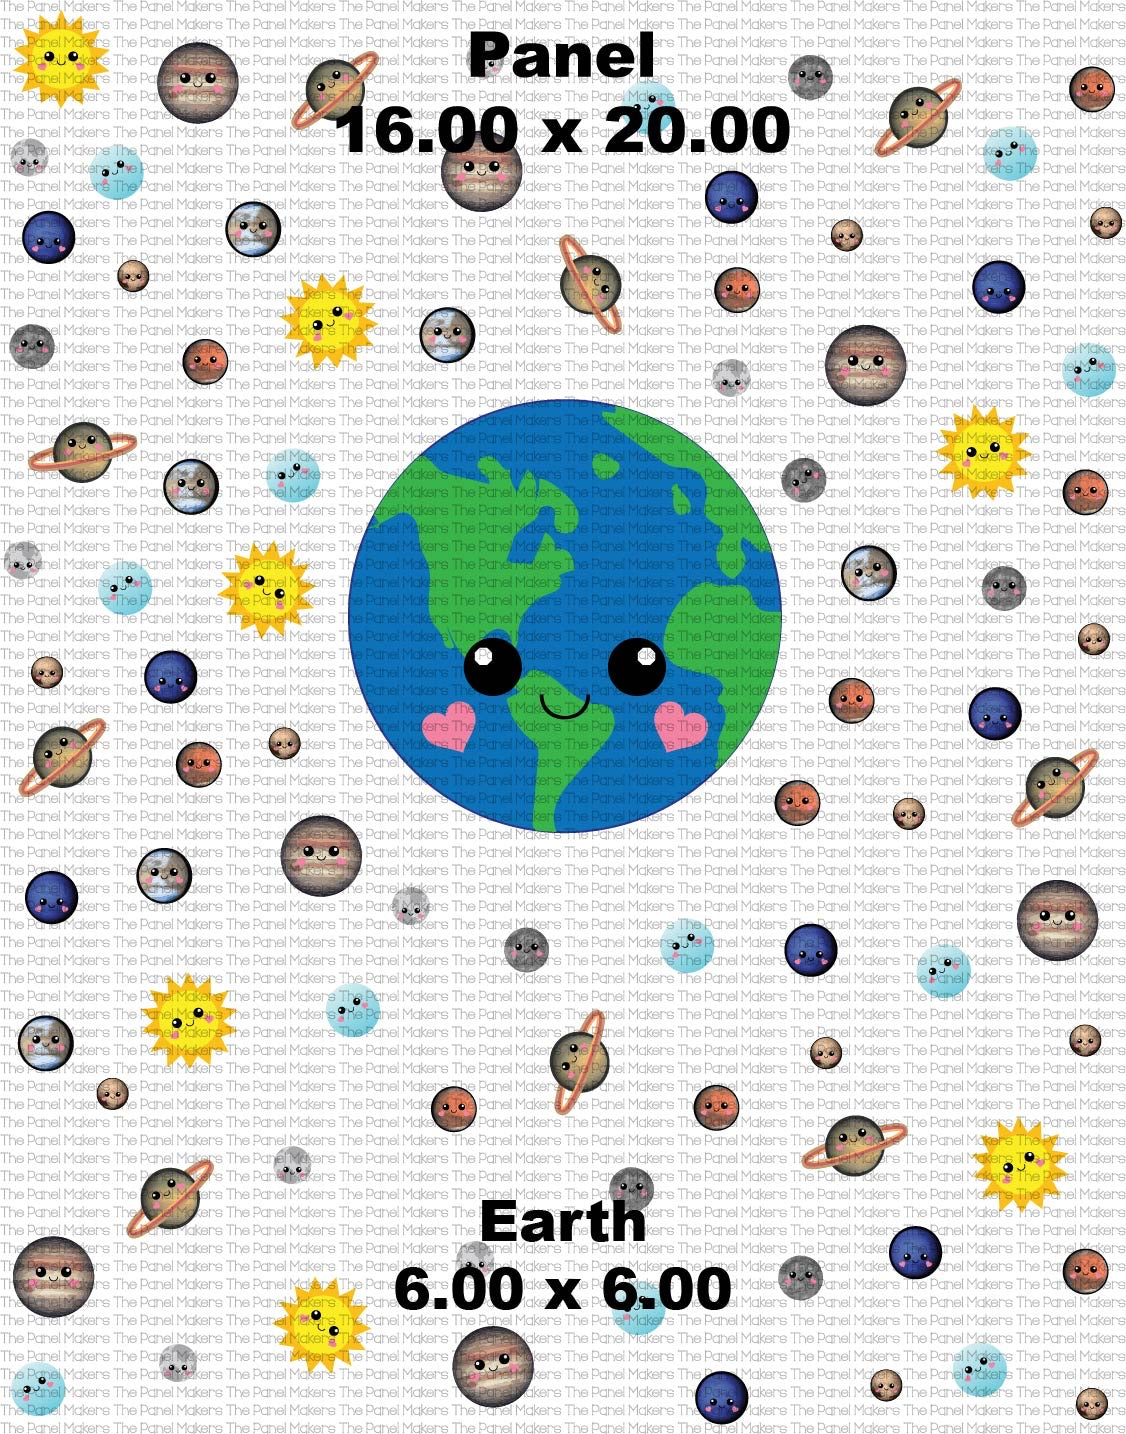 Earth/Planets Large panel